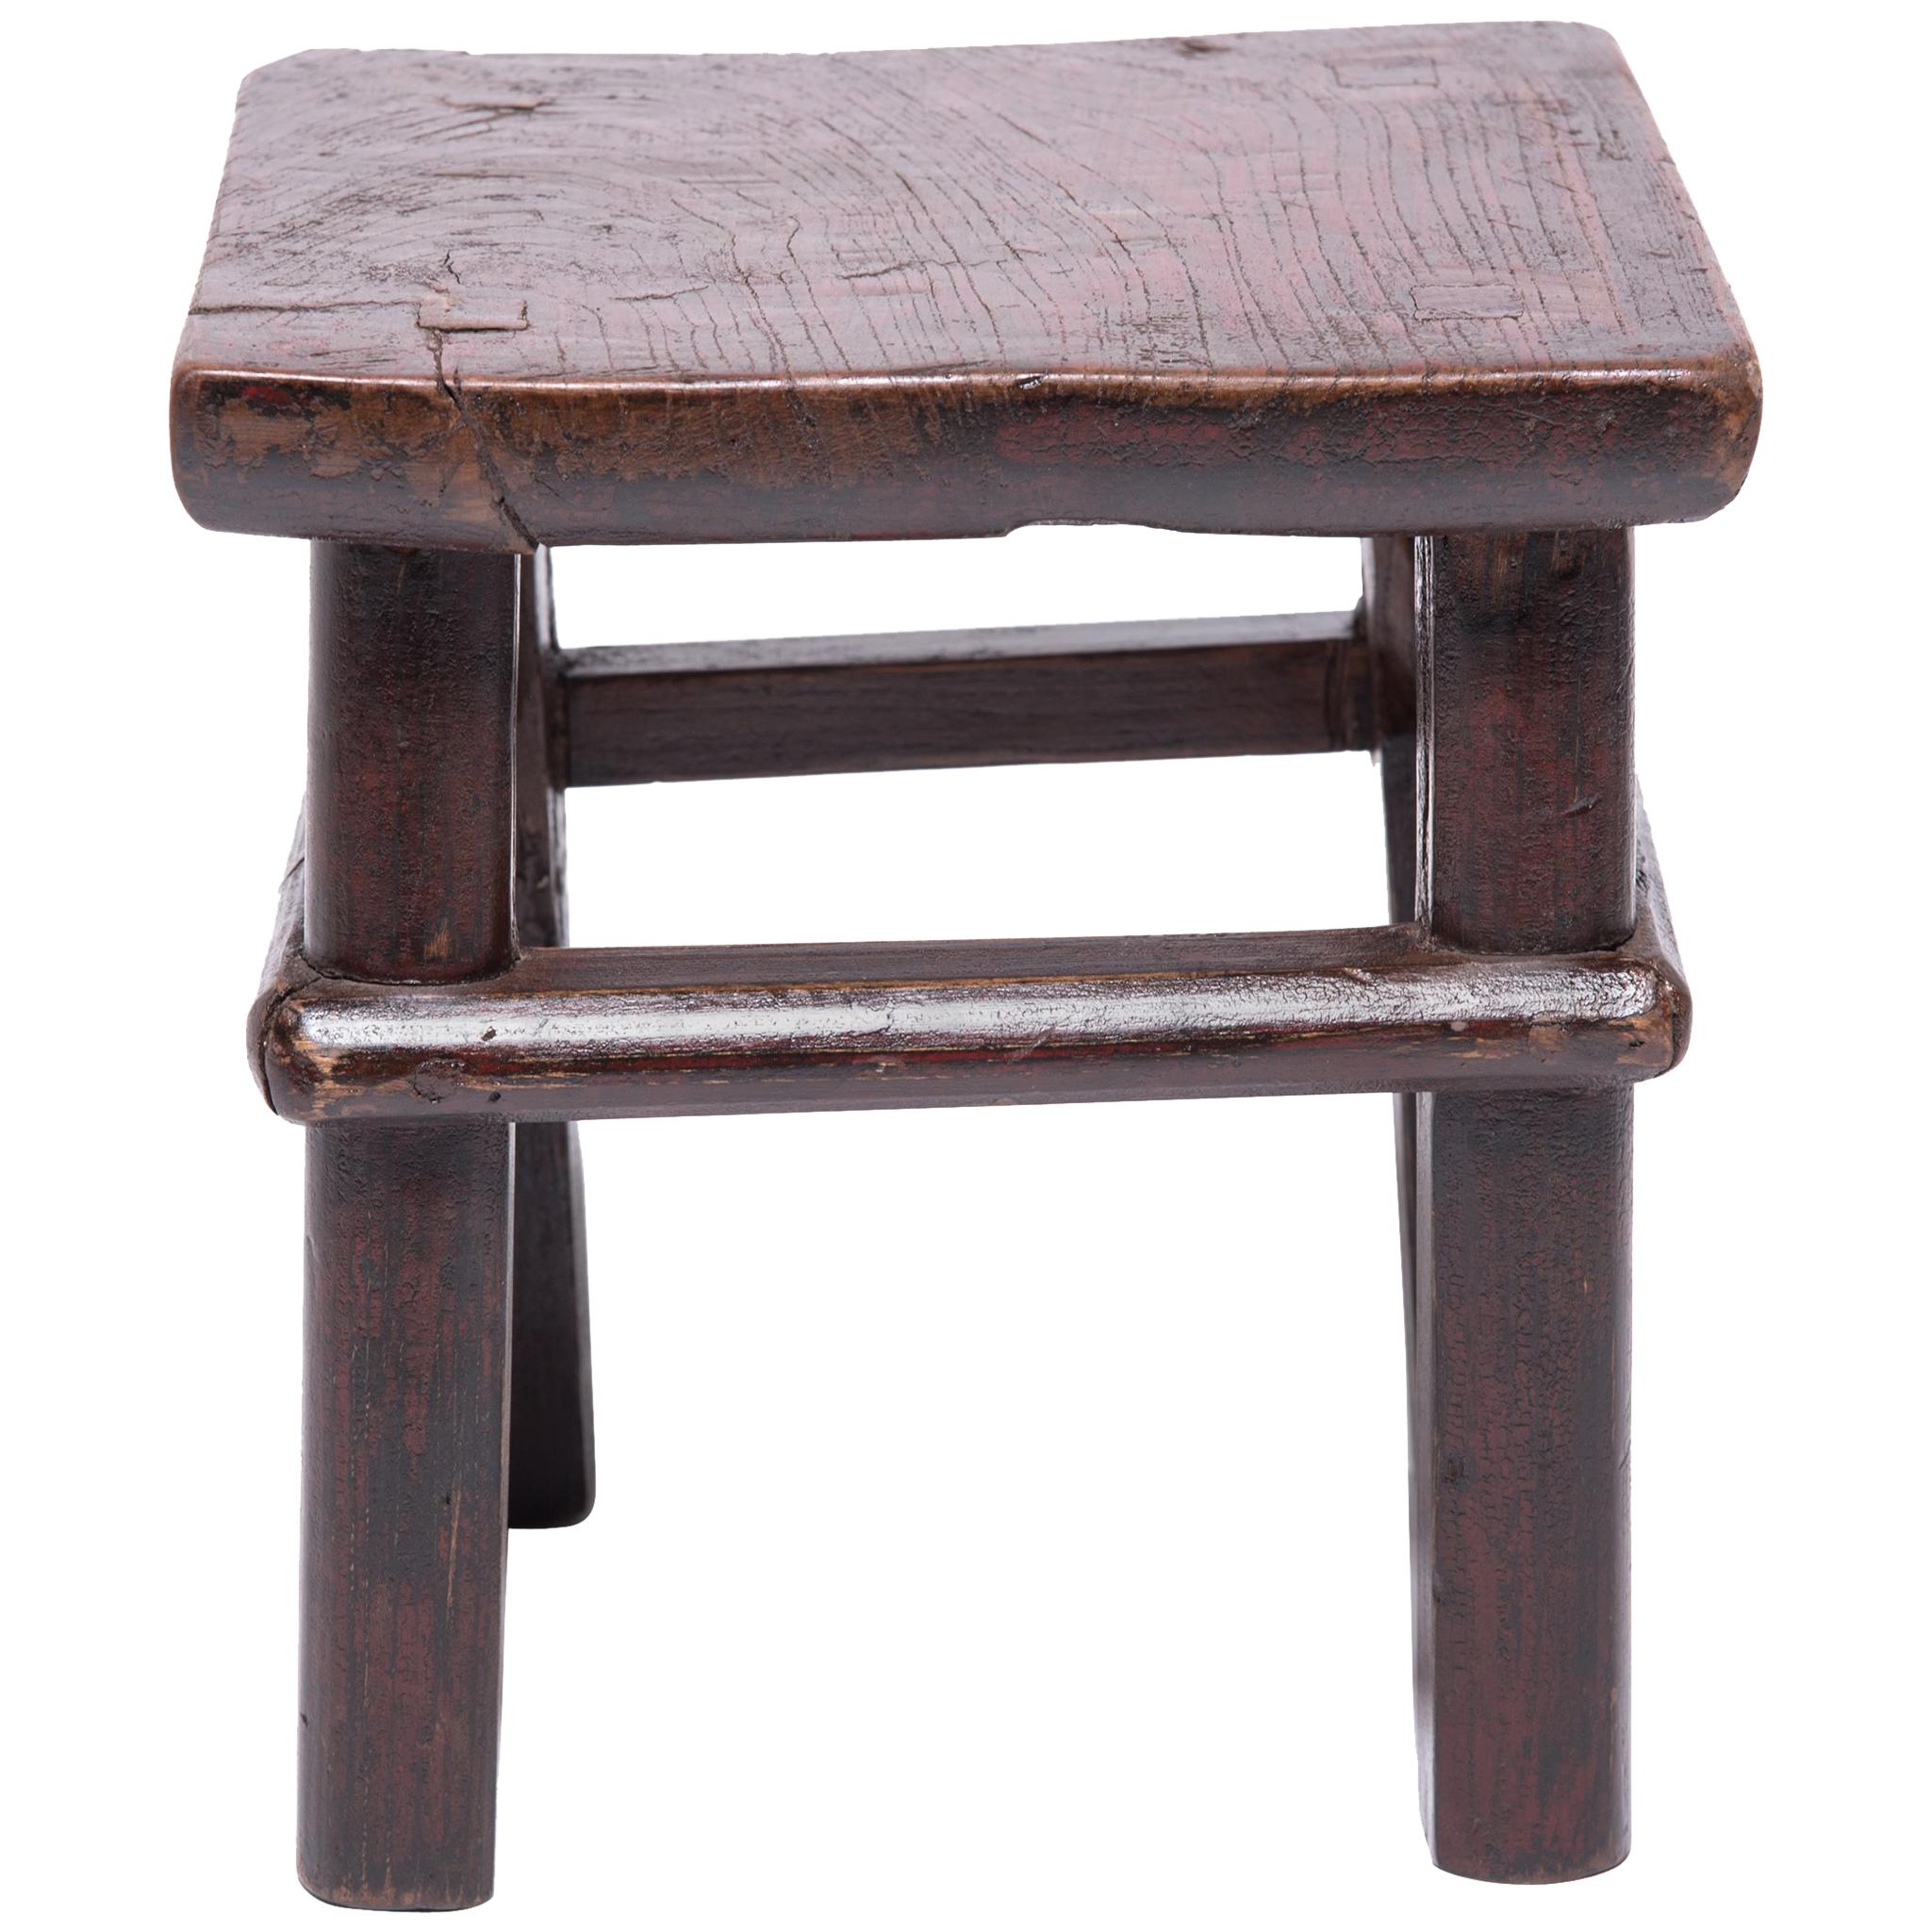 Mid-19th Century Chinese Feng Deng Stool